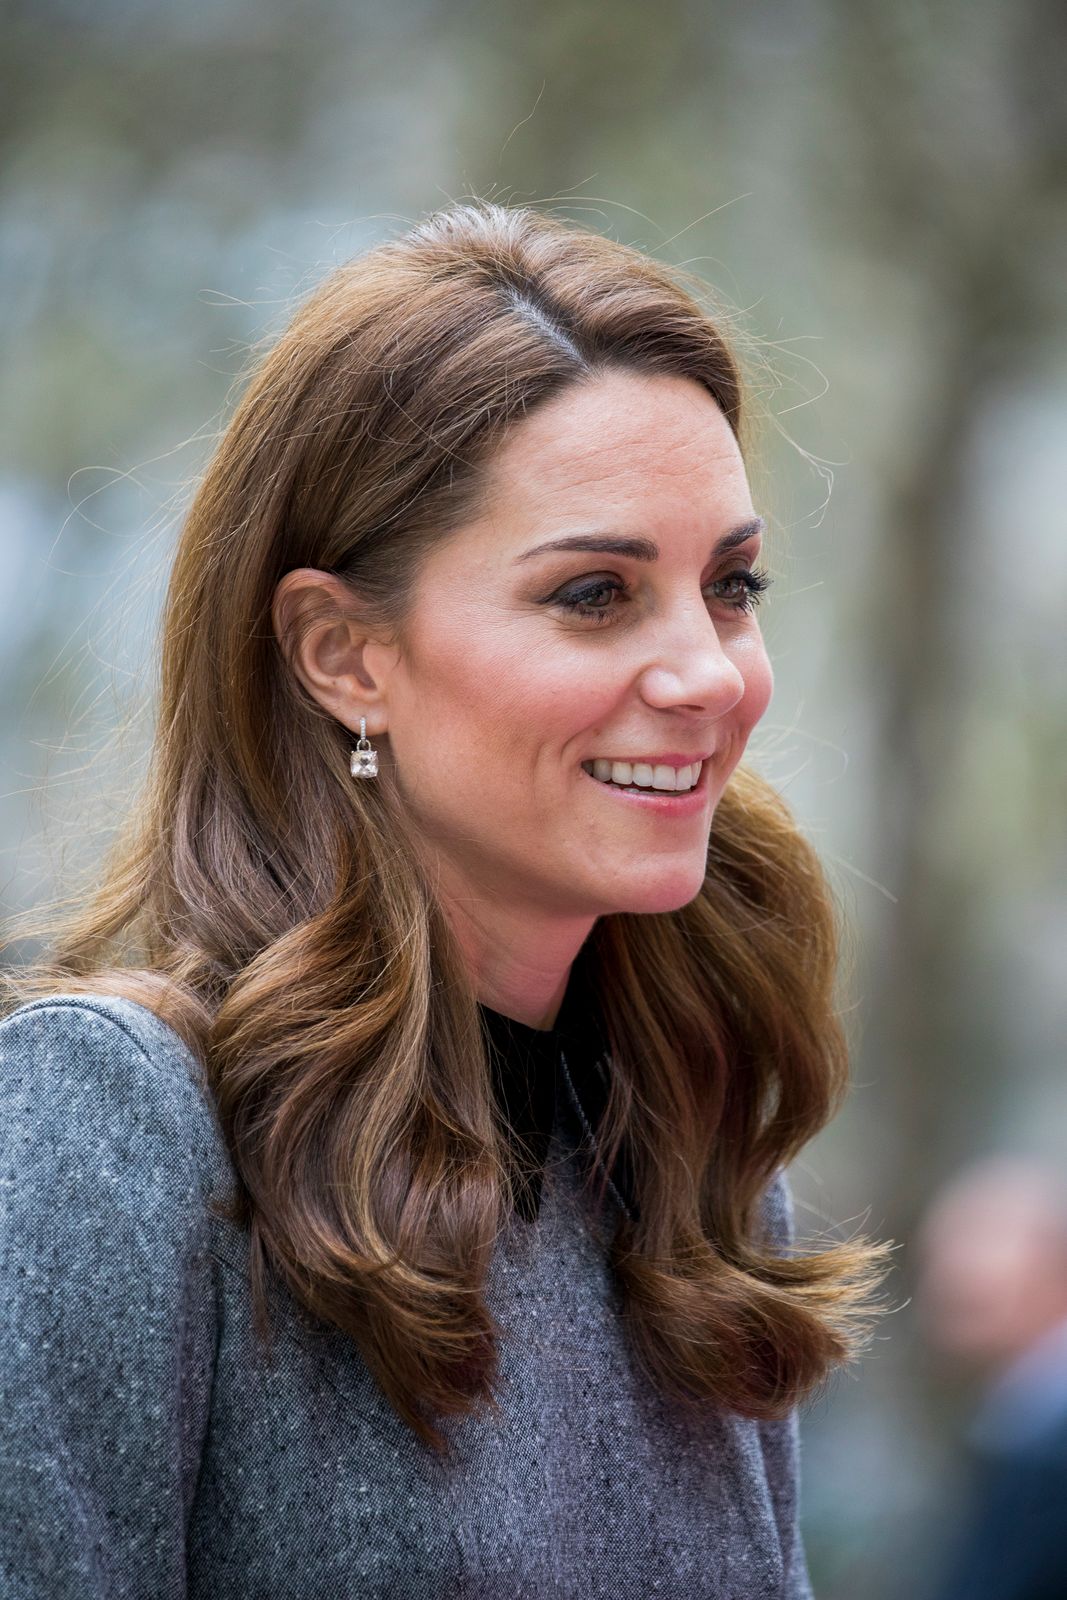 Kate Middleton, the Duchess Of Cambridge, visits The Foundling Museum on March 19, 2019 in London, England. | Photo: Getty Images